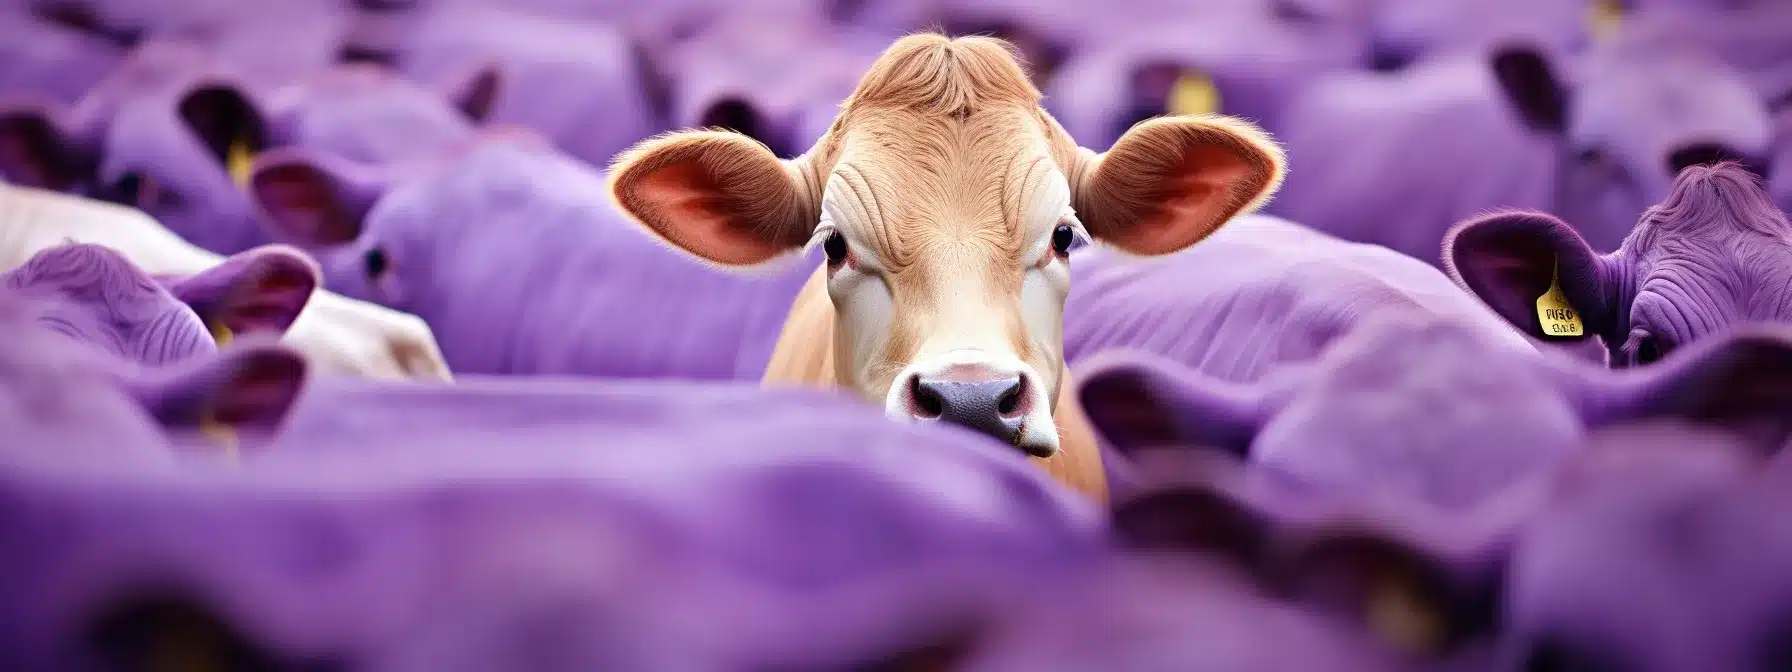 A Website With A Purple Cow Among A Herd Of Brown Cows, Representing The Use Of Purple Cow Principles In Seo.